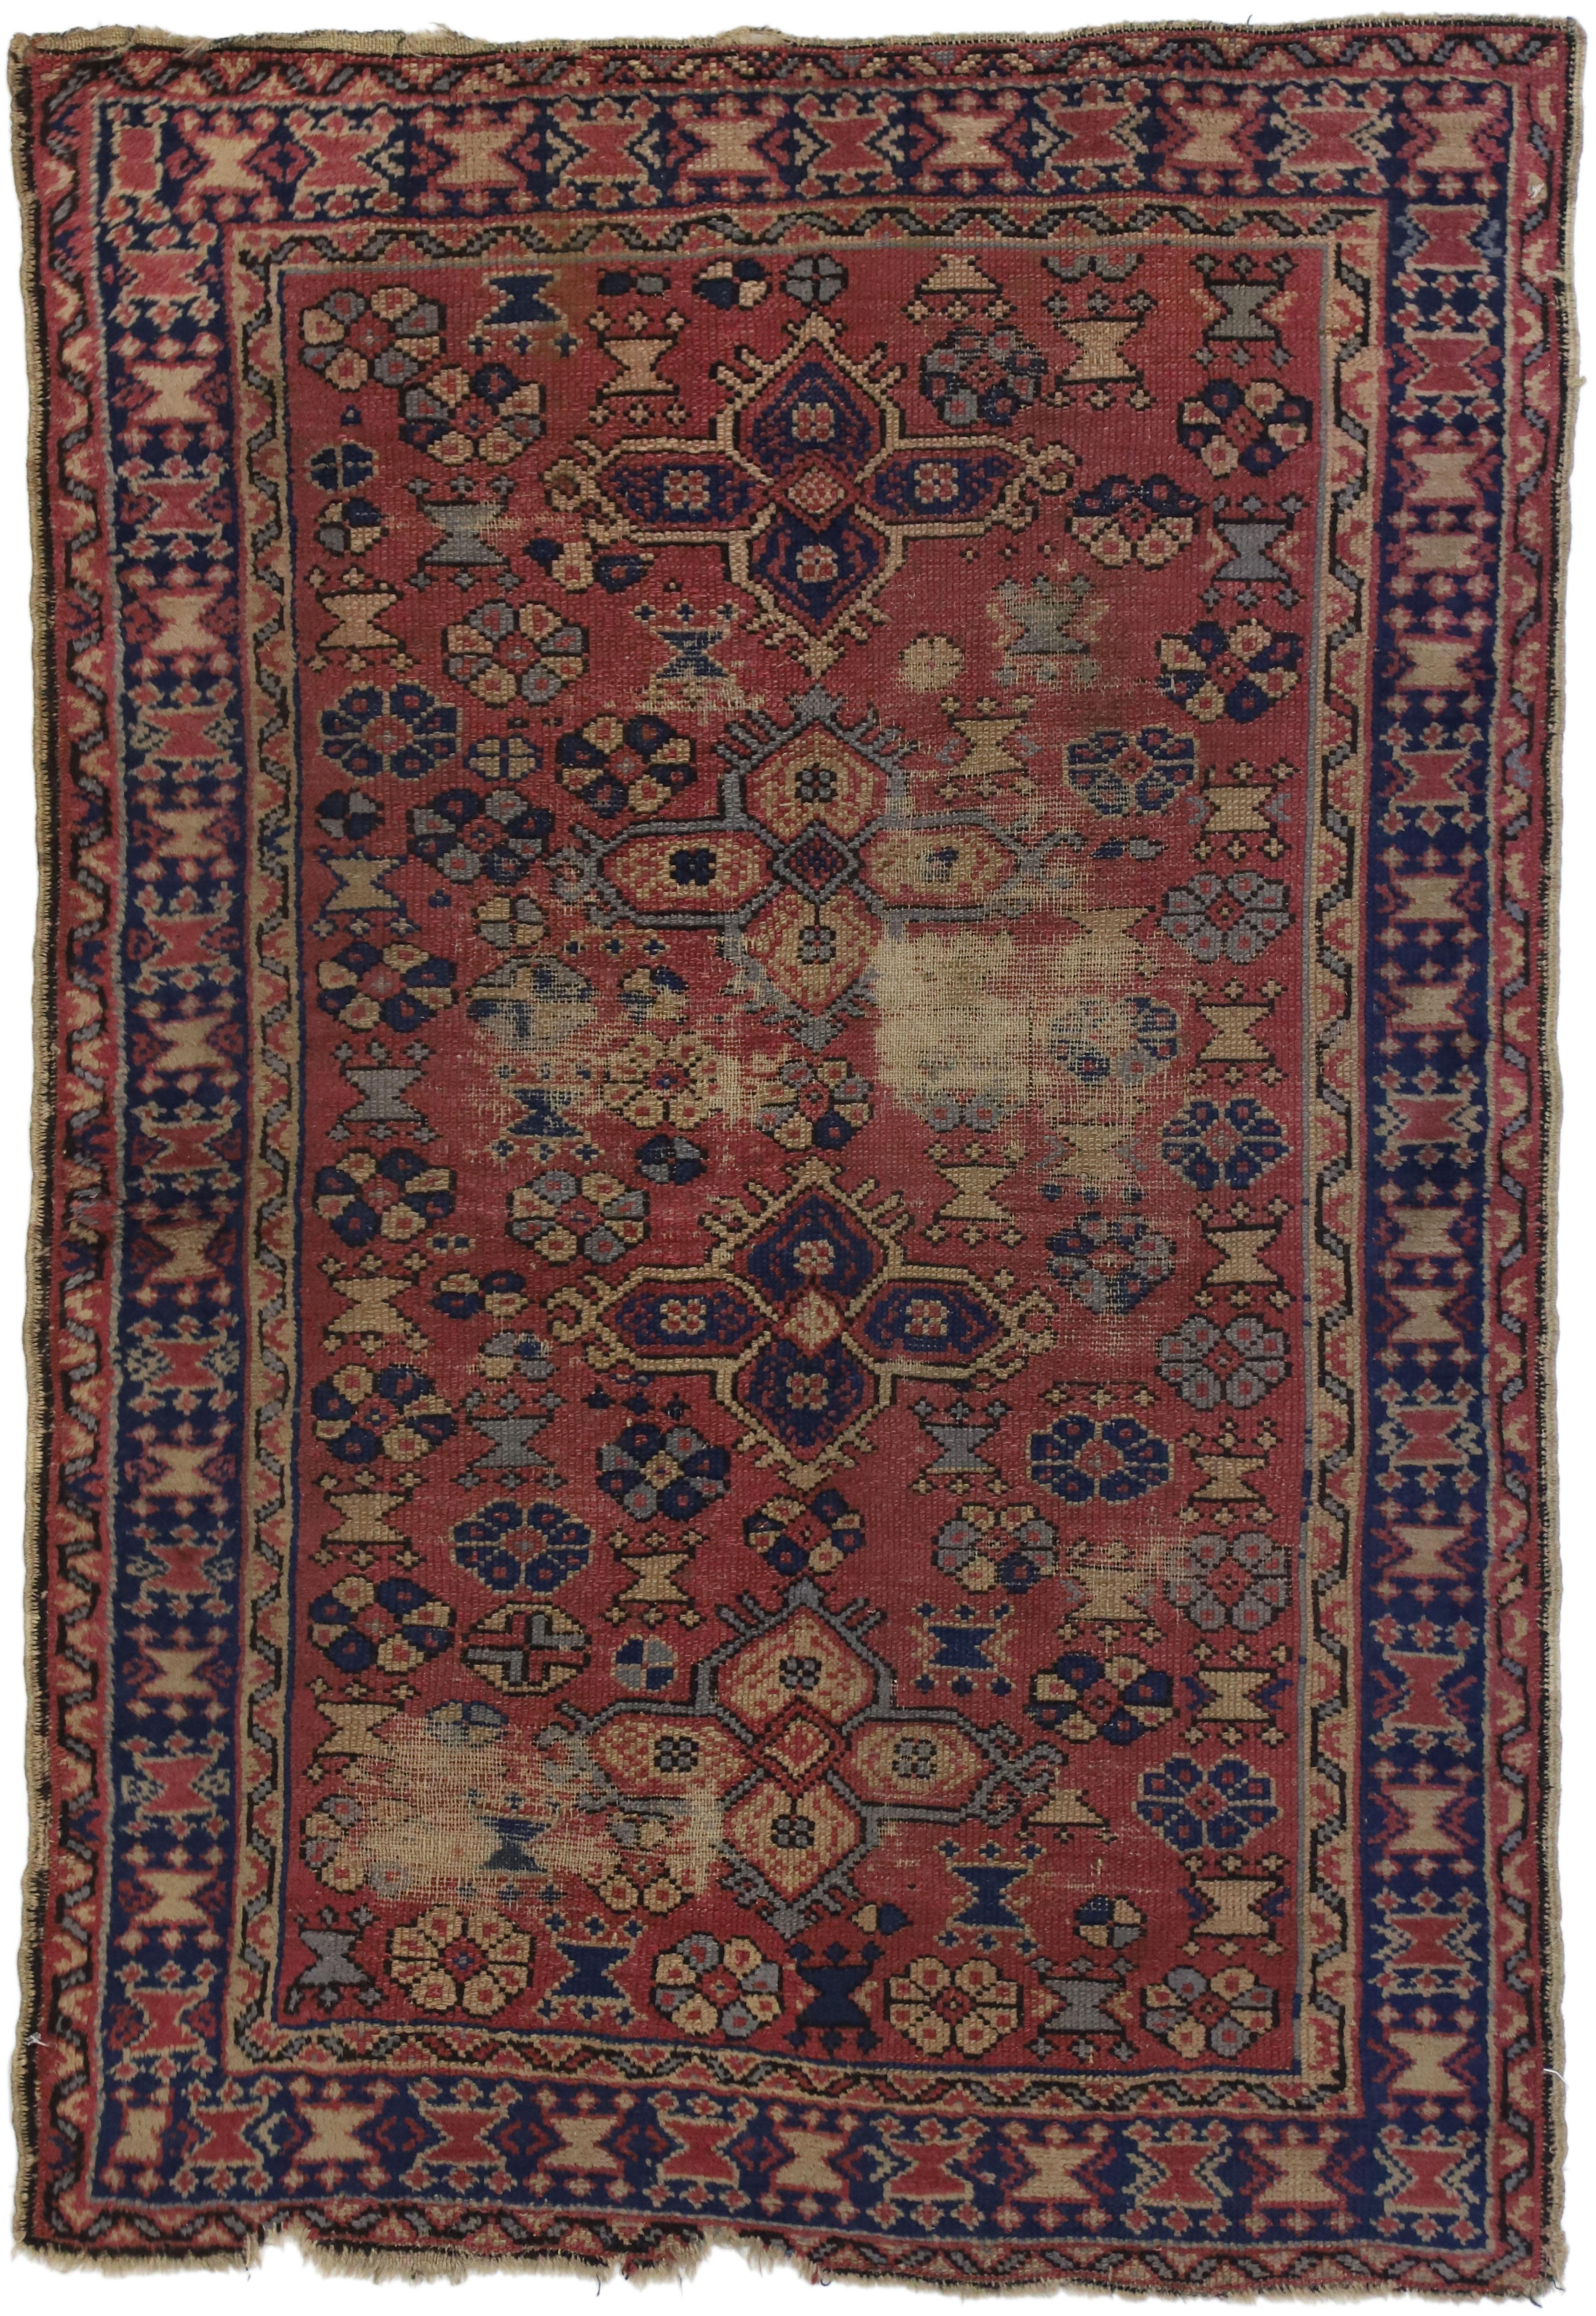 Distressed Antique Turkish Sparta Rug with Industrial Rustic Artisan Style 3